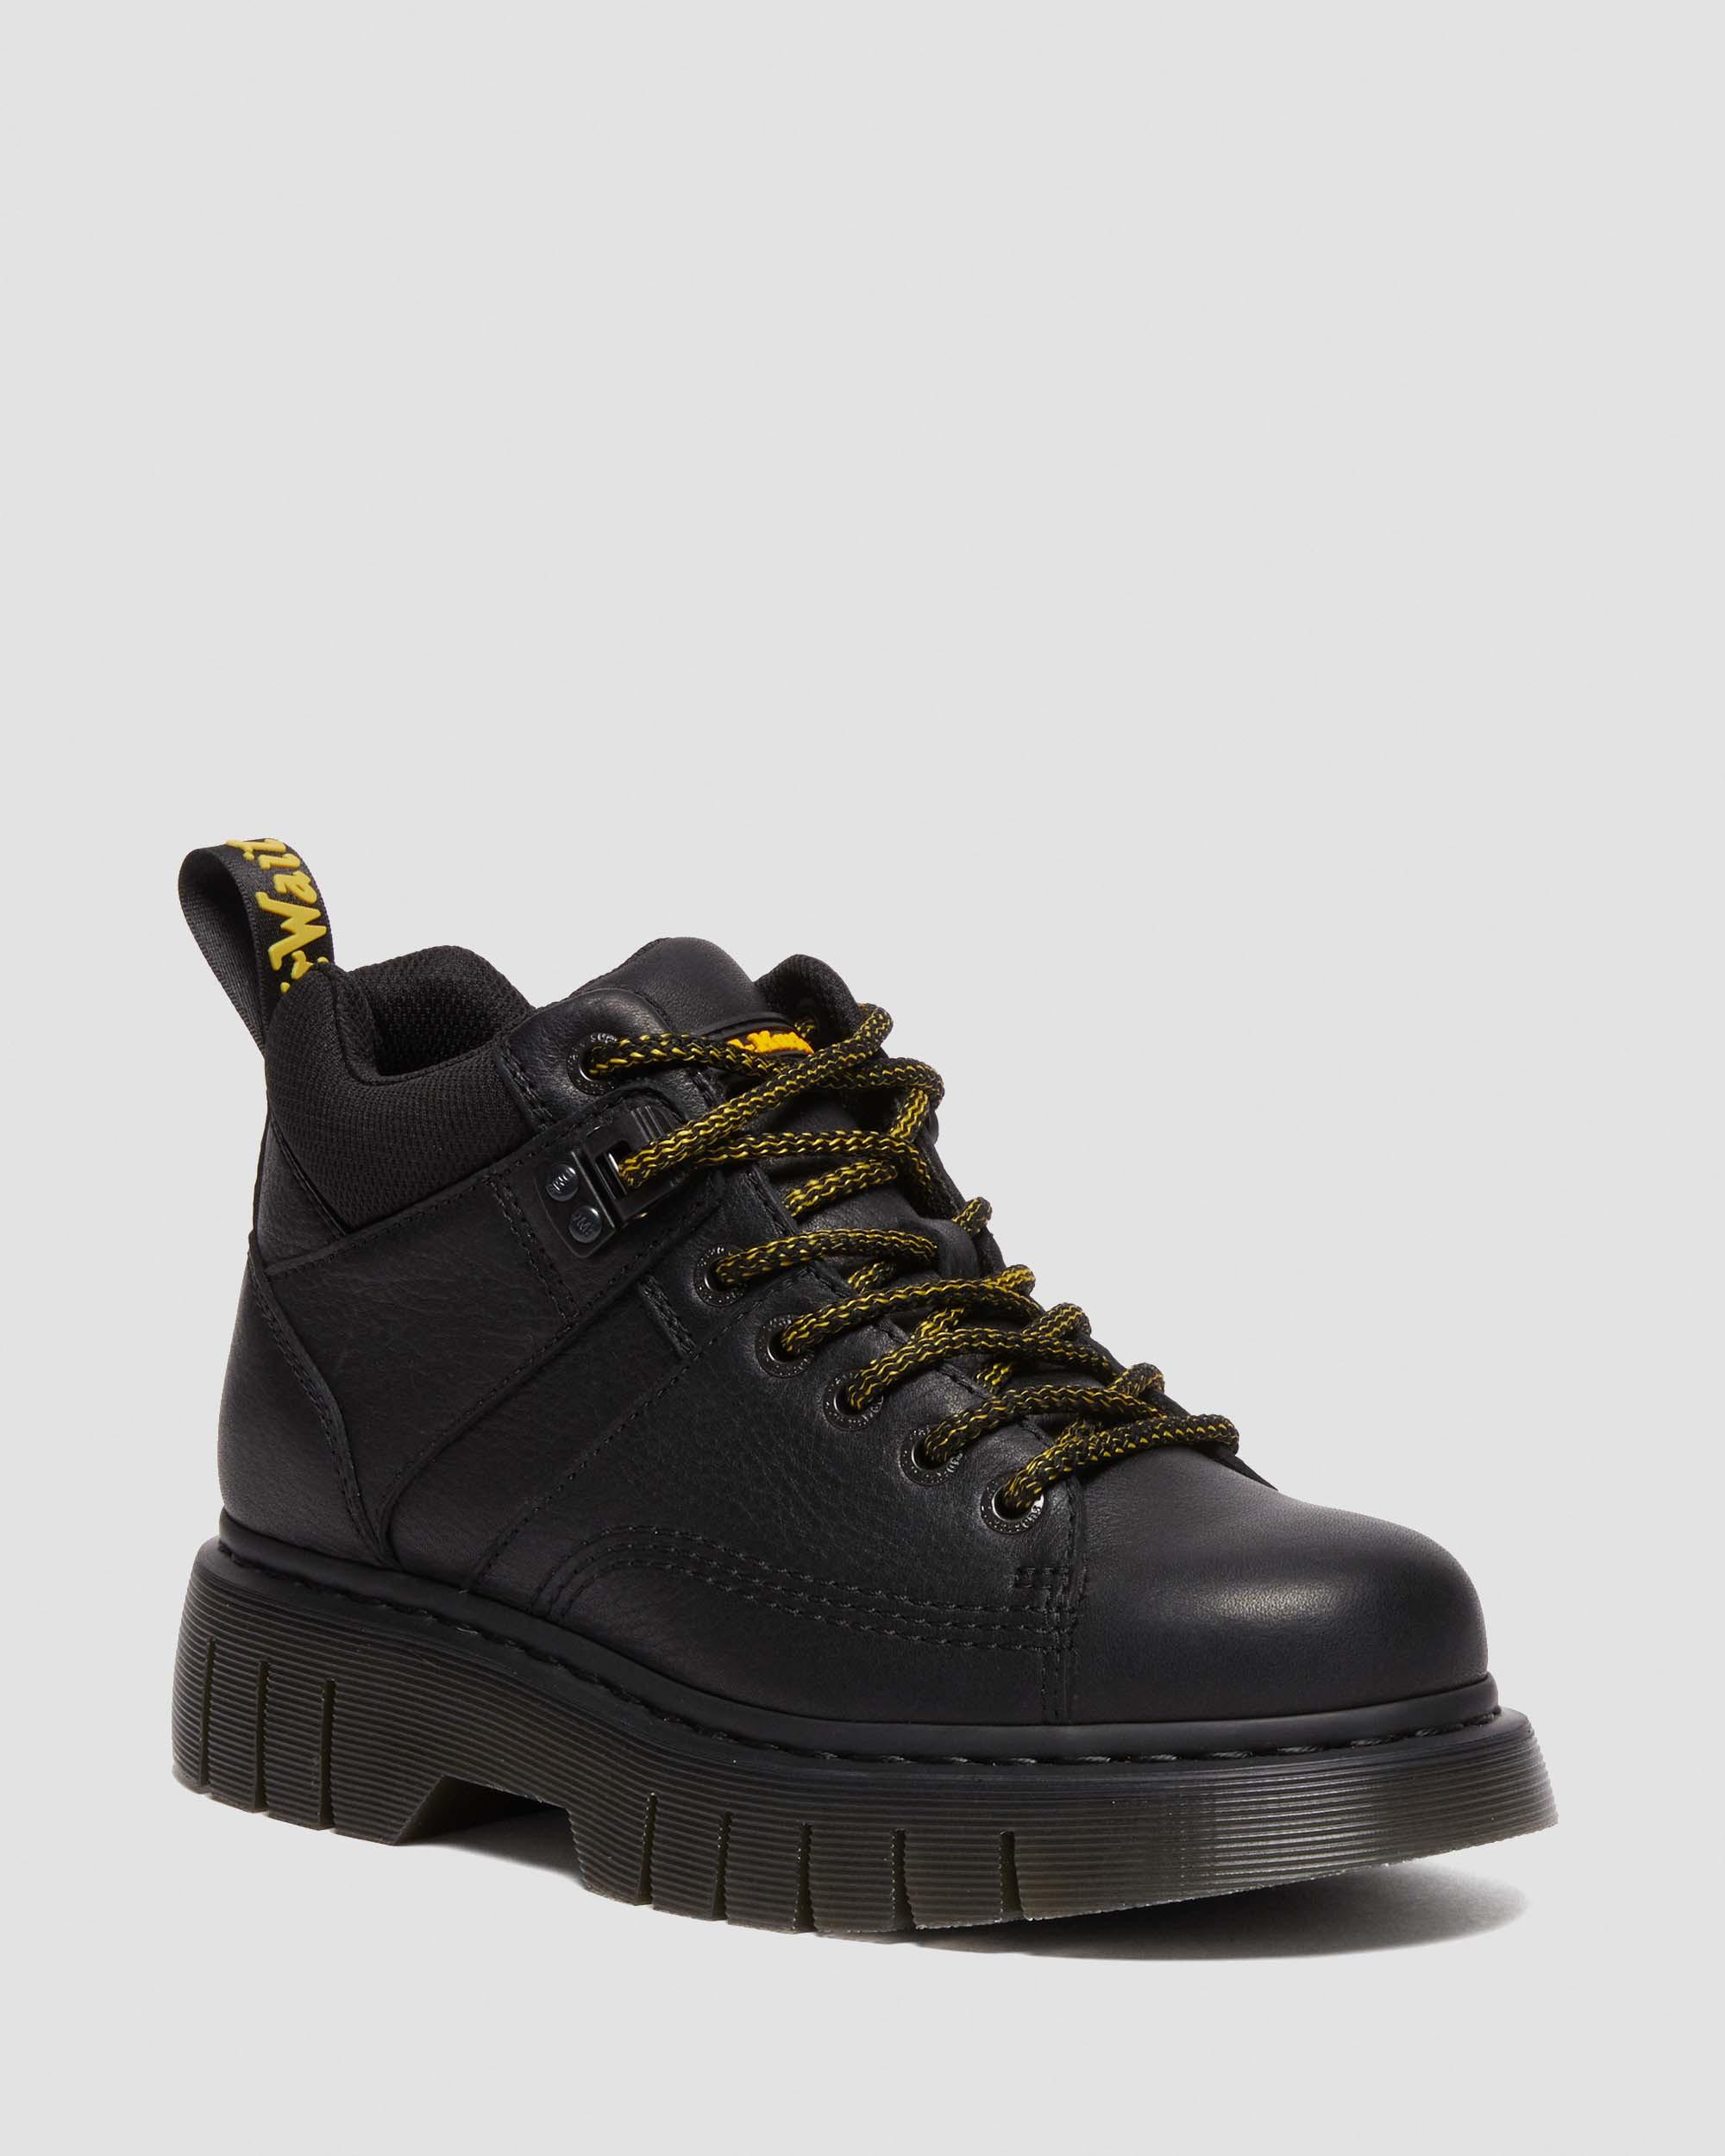 Woodard Leather Lace Up Ankle BootsWoodard Leather Lace Up Ankle Boots Dr. Martens